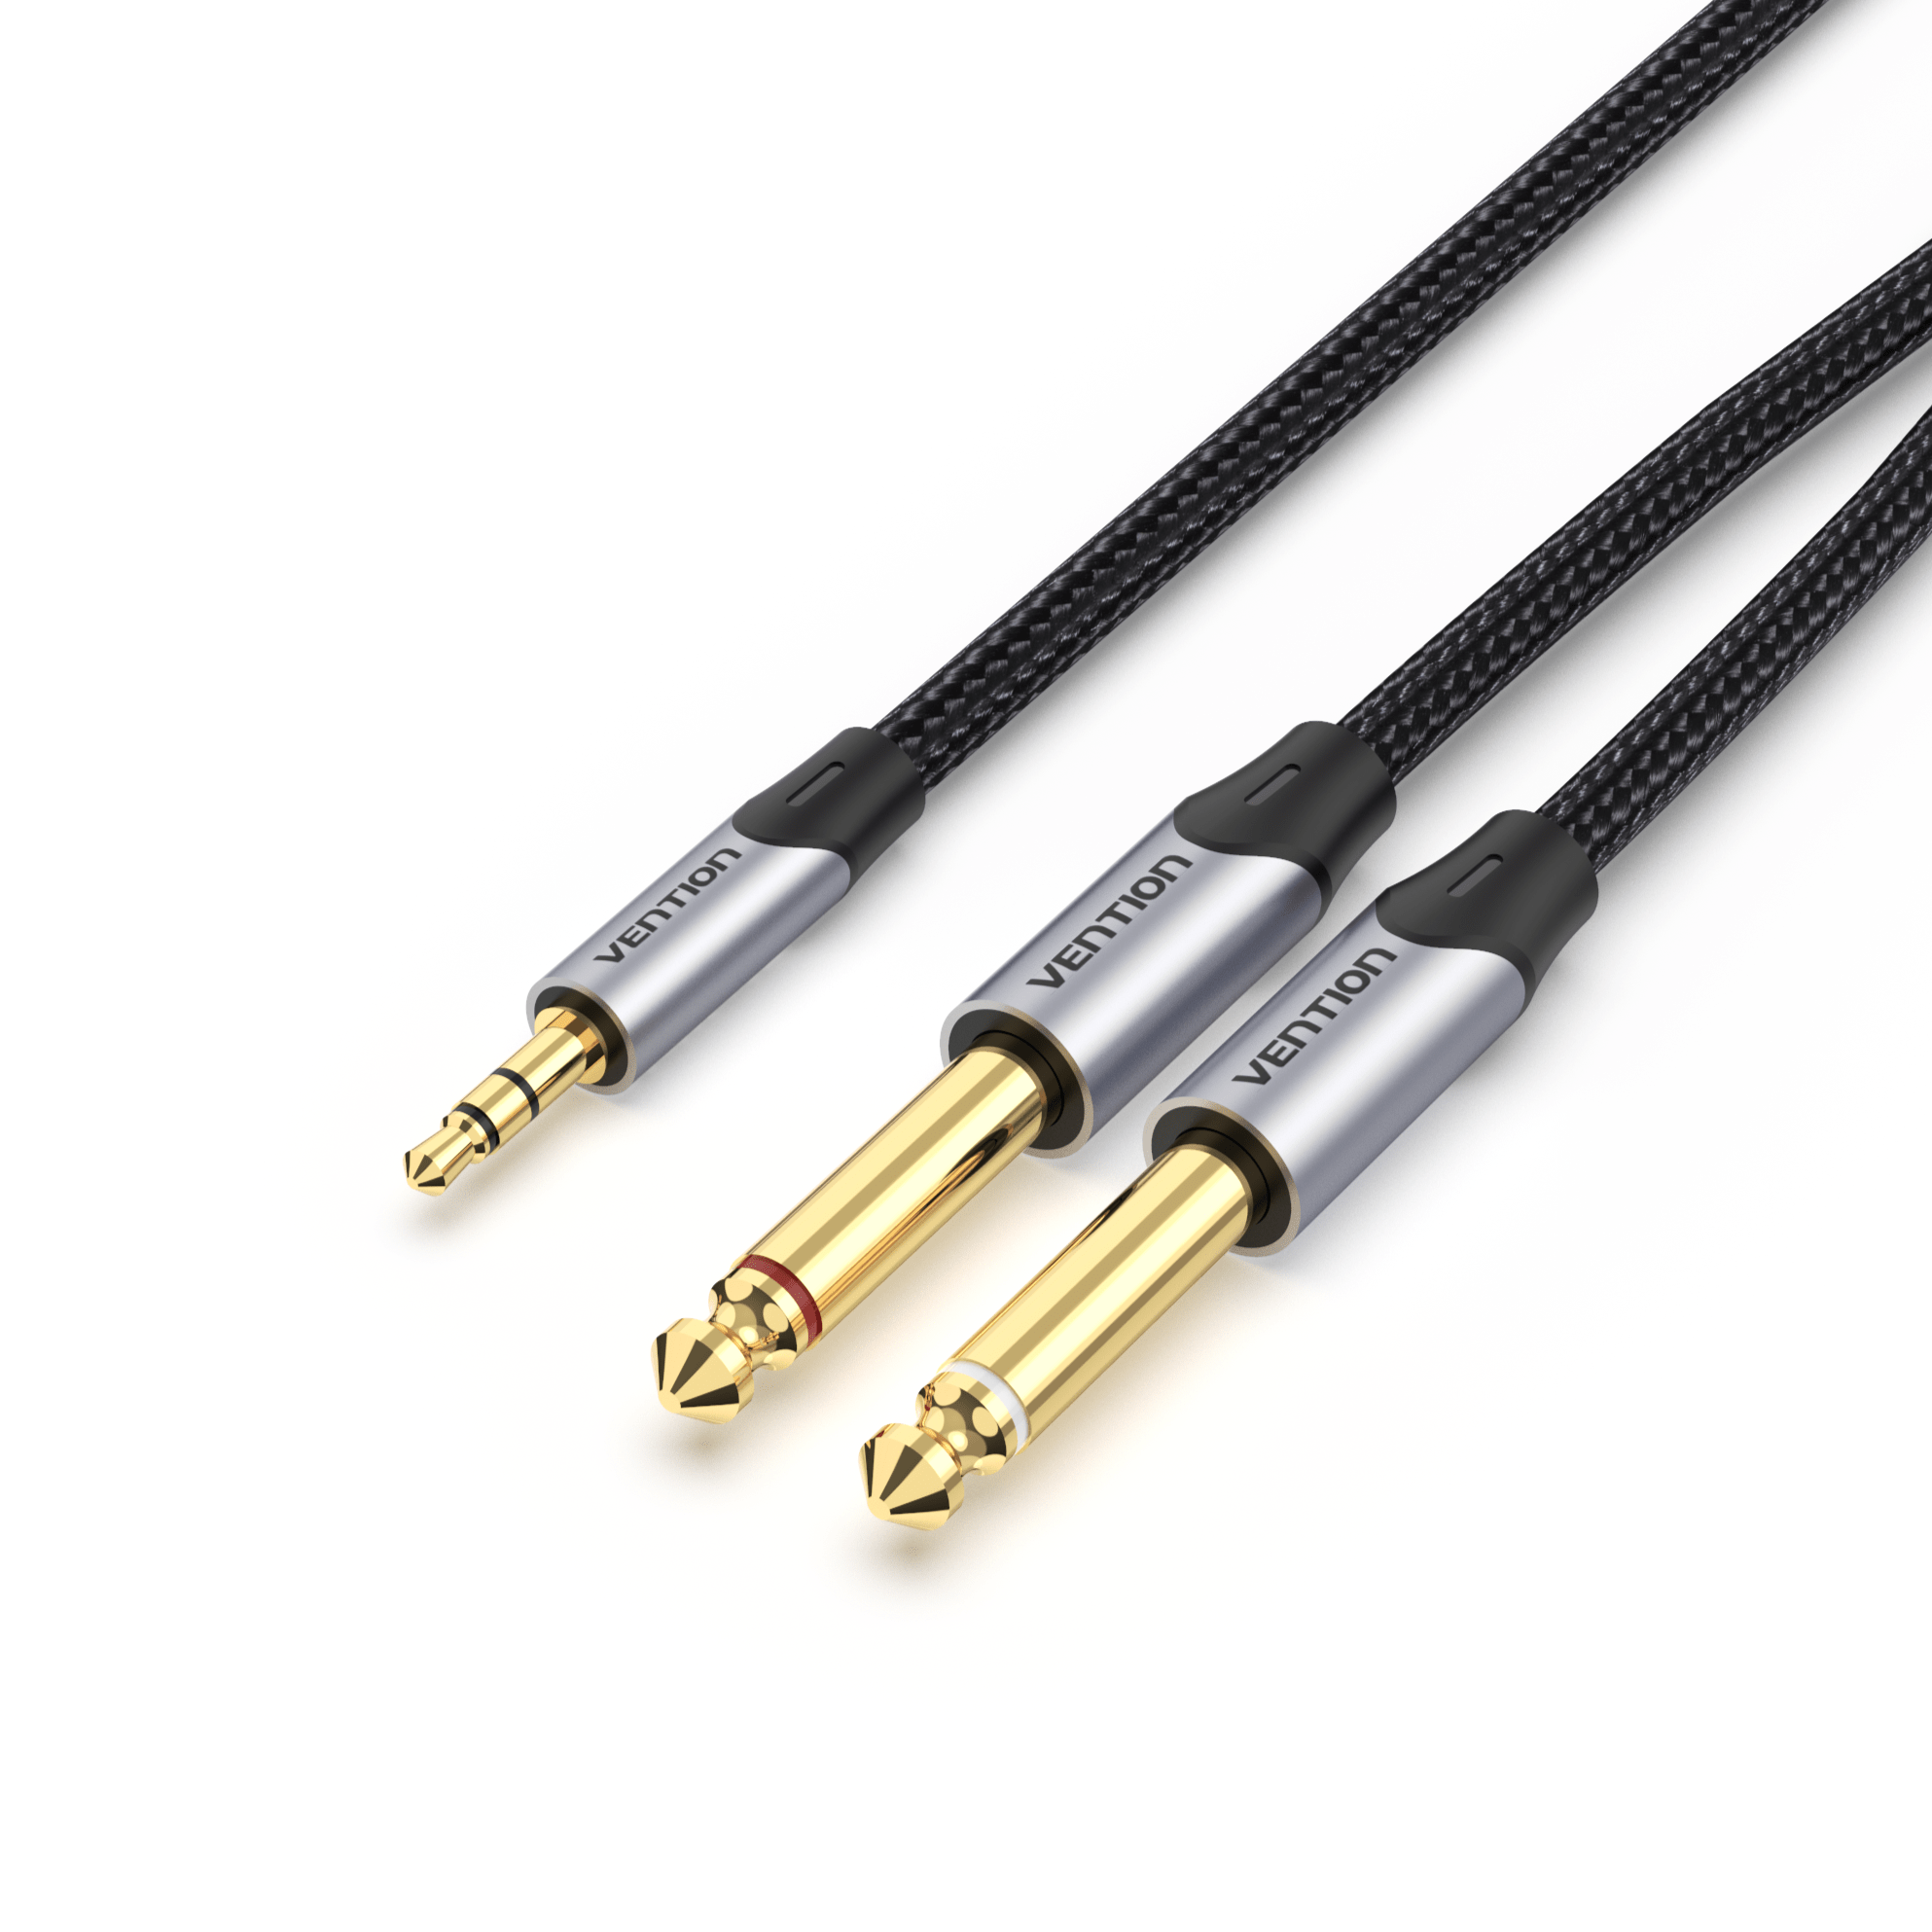 3.5mm to Double 6.5mm TRS Cable AUX Male Mono 6.5 Jack to Stereo 3.5 J